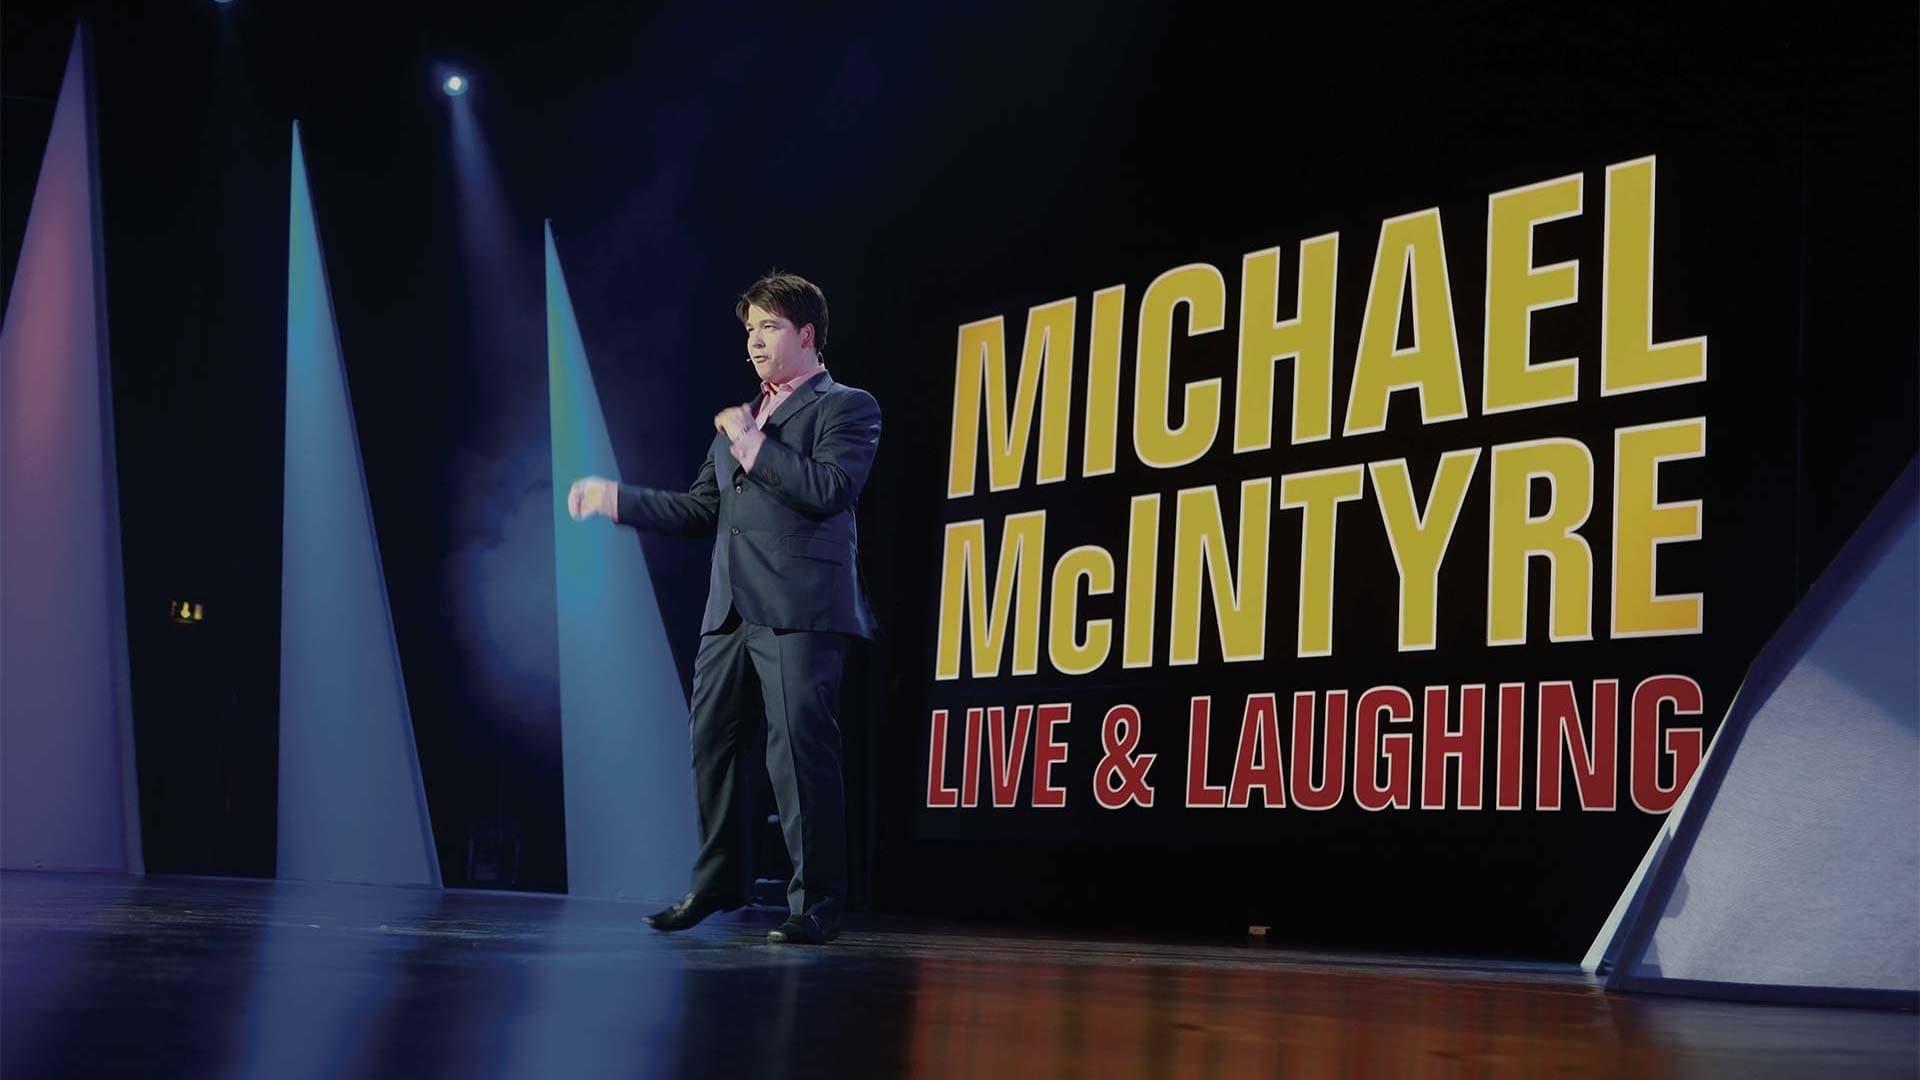 Michael McIntyre: Live & Laughing backdrop